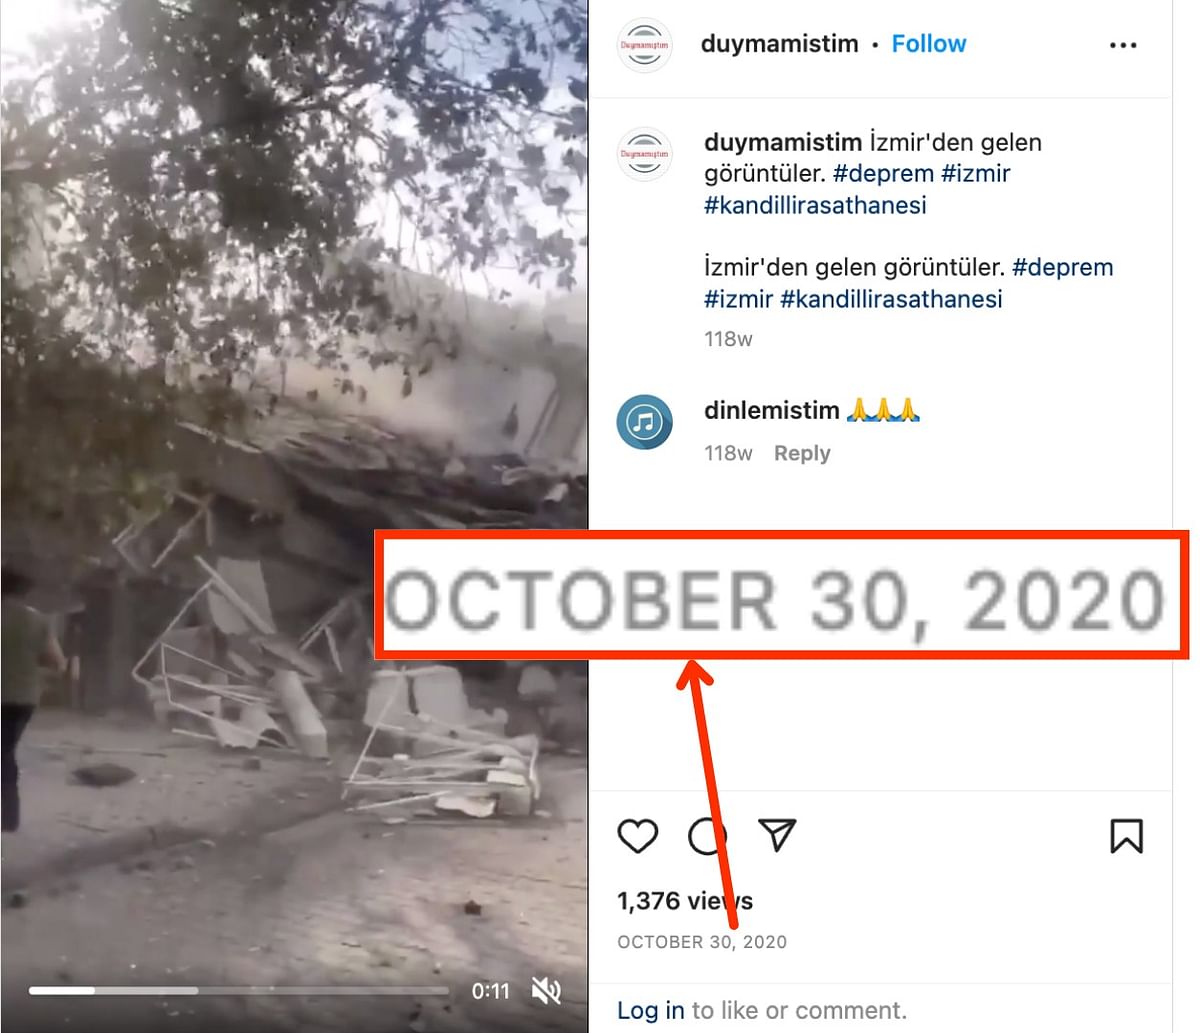 Both videos have been on the internet since October 2020 and are not recent visuals of the earthquake in Turkey.